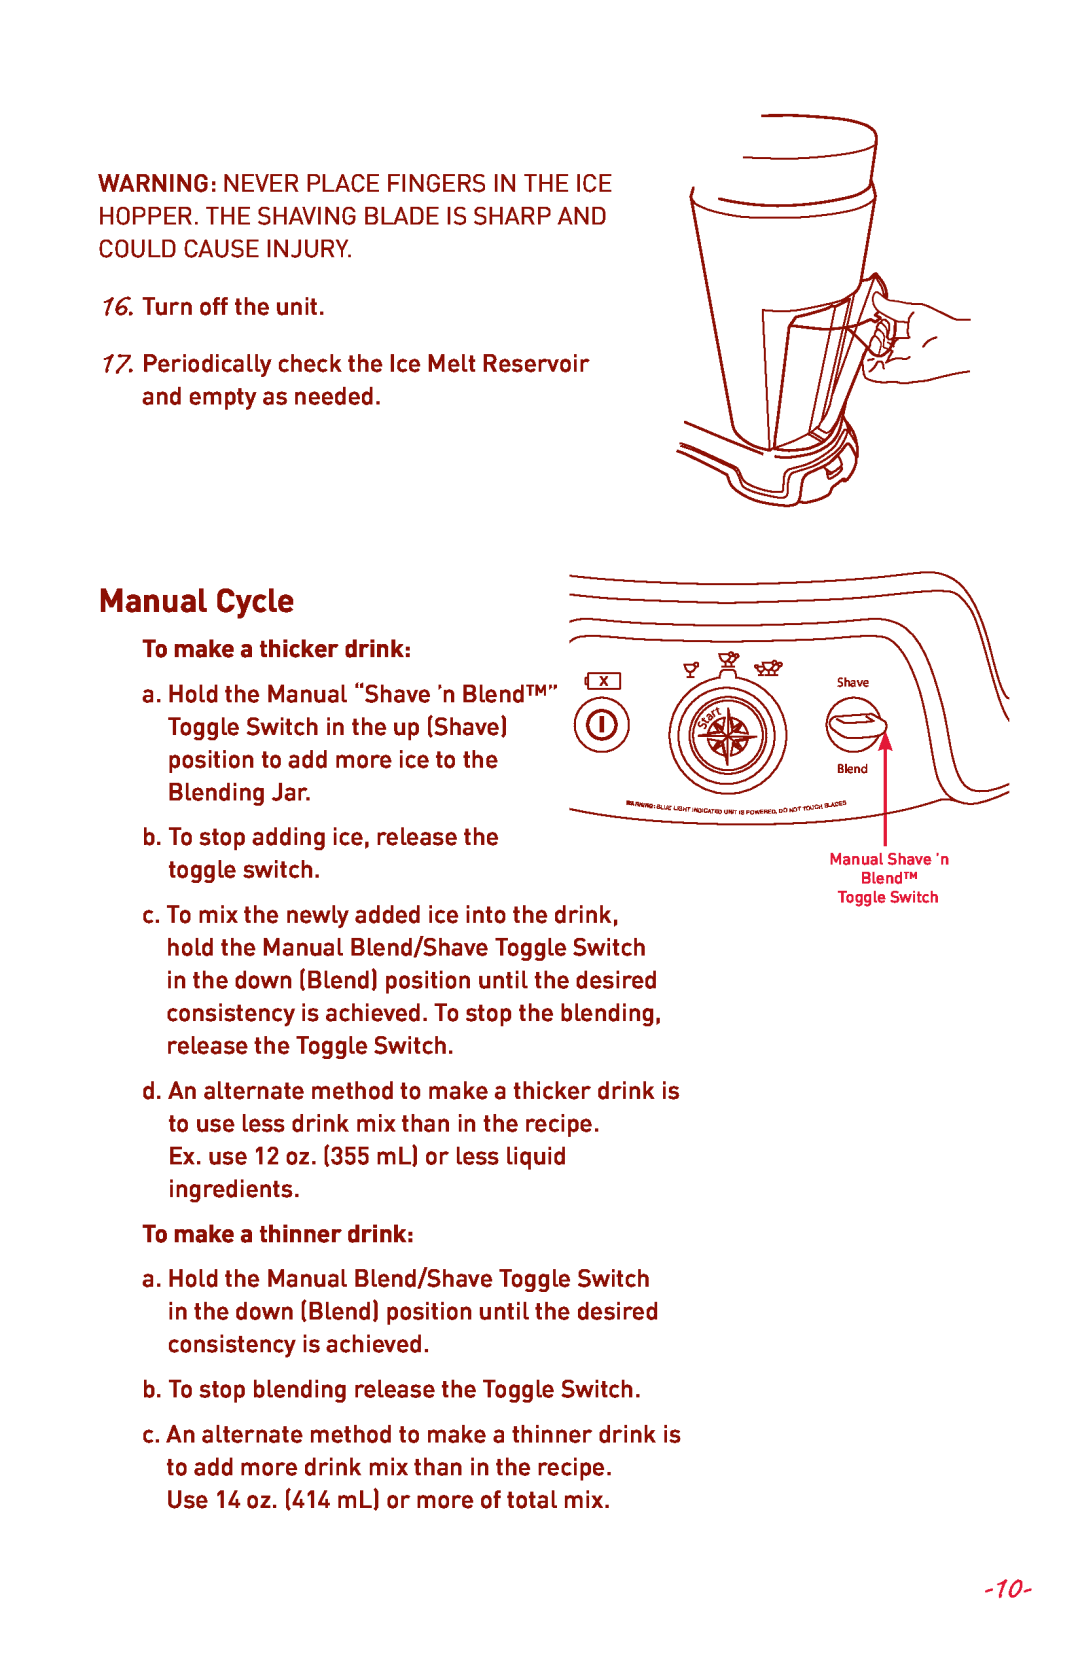 Margaritaville NBMGDM0900 user manual Manual Cycle, To make a thicker drink, To make a thinner drink 